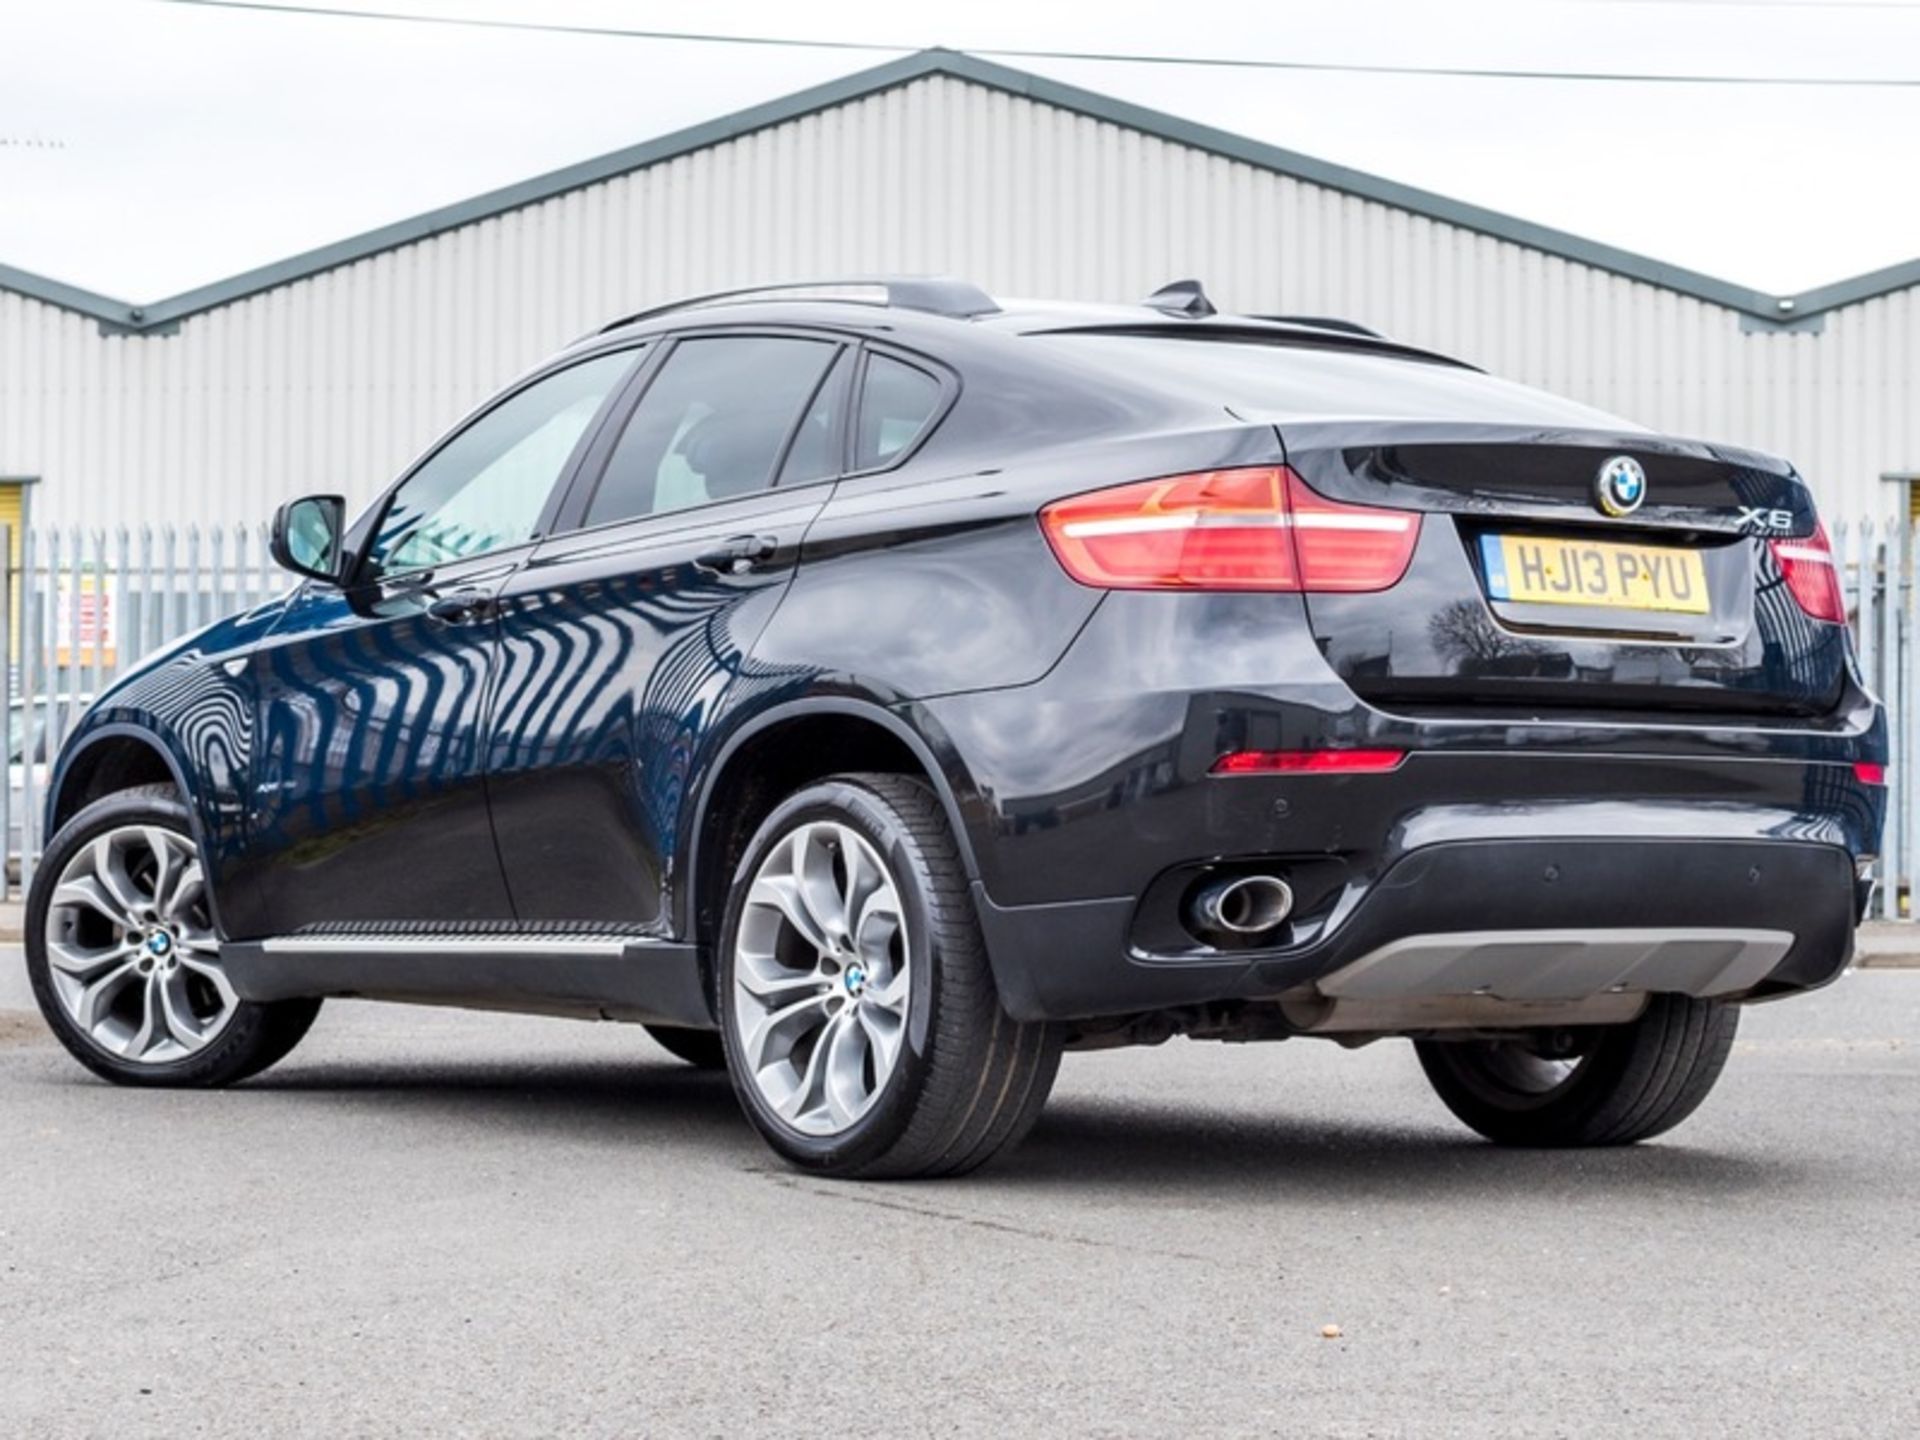 2013/13 REG BMW X6 XDRIVE 40D AUTO 3.0 DIESEL 4X4 BLACK, SHOWING 2 FORMER KEEPERS *NO VAT* - Image 4 of 28